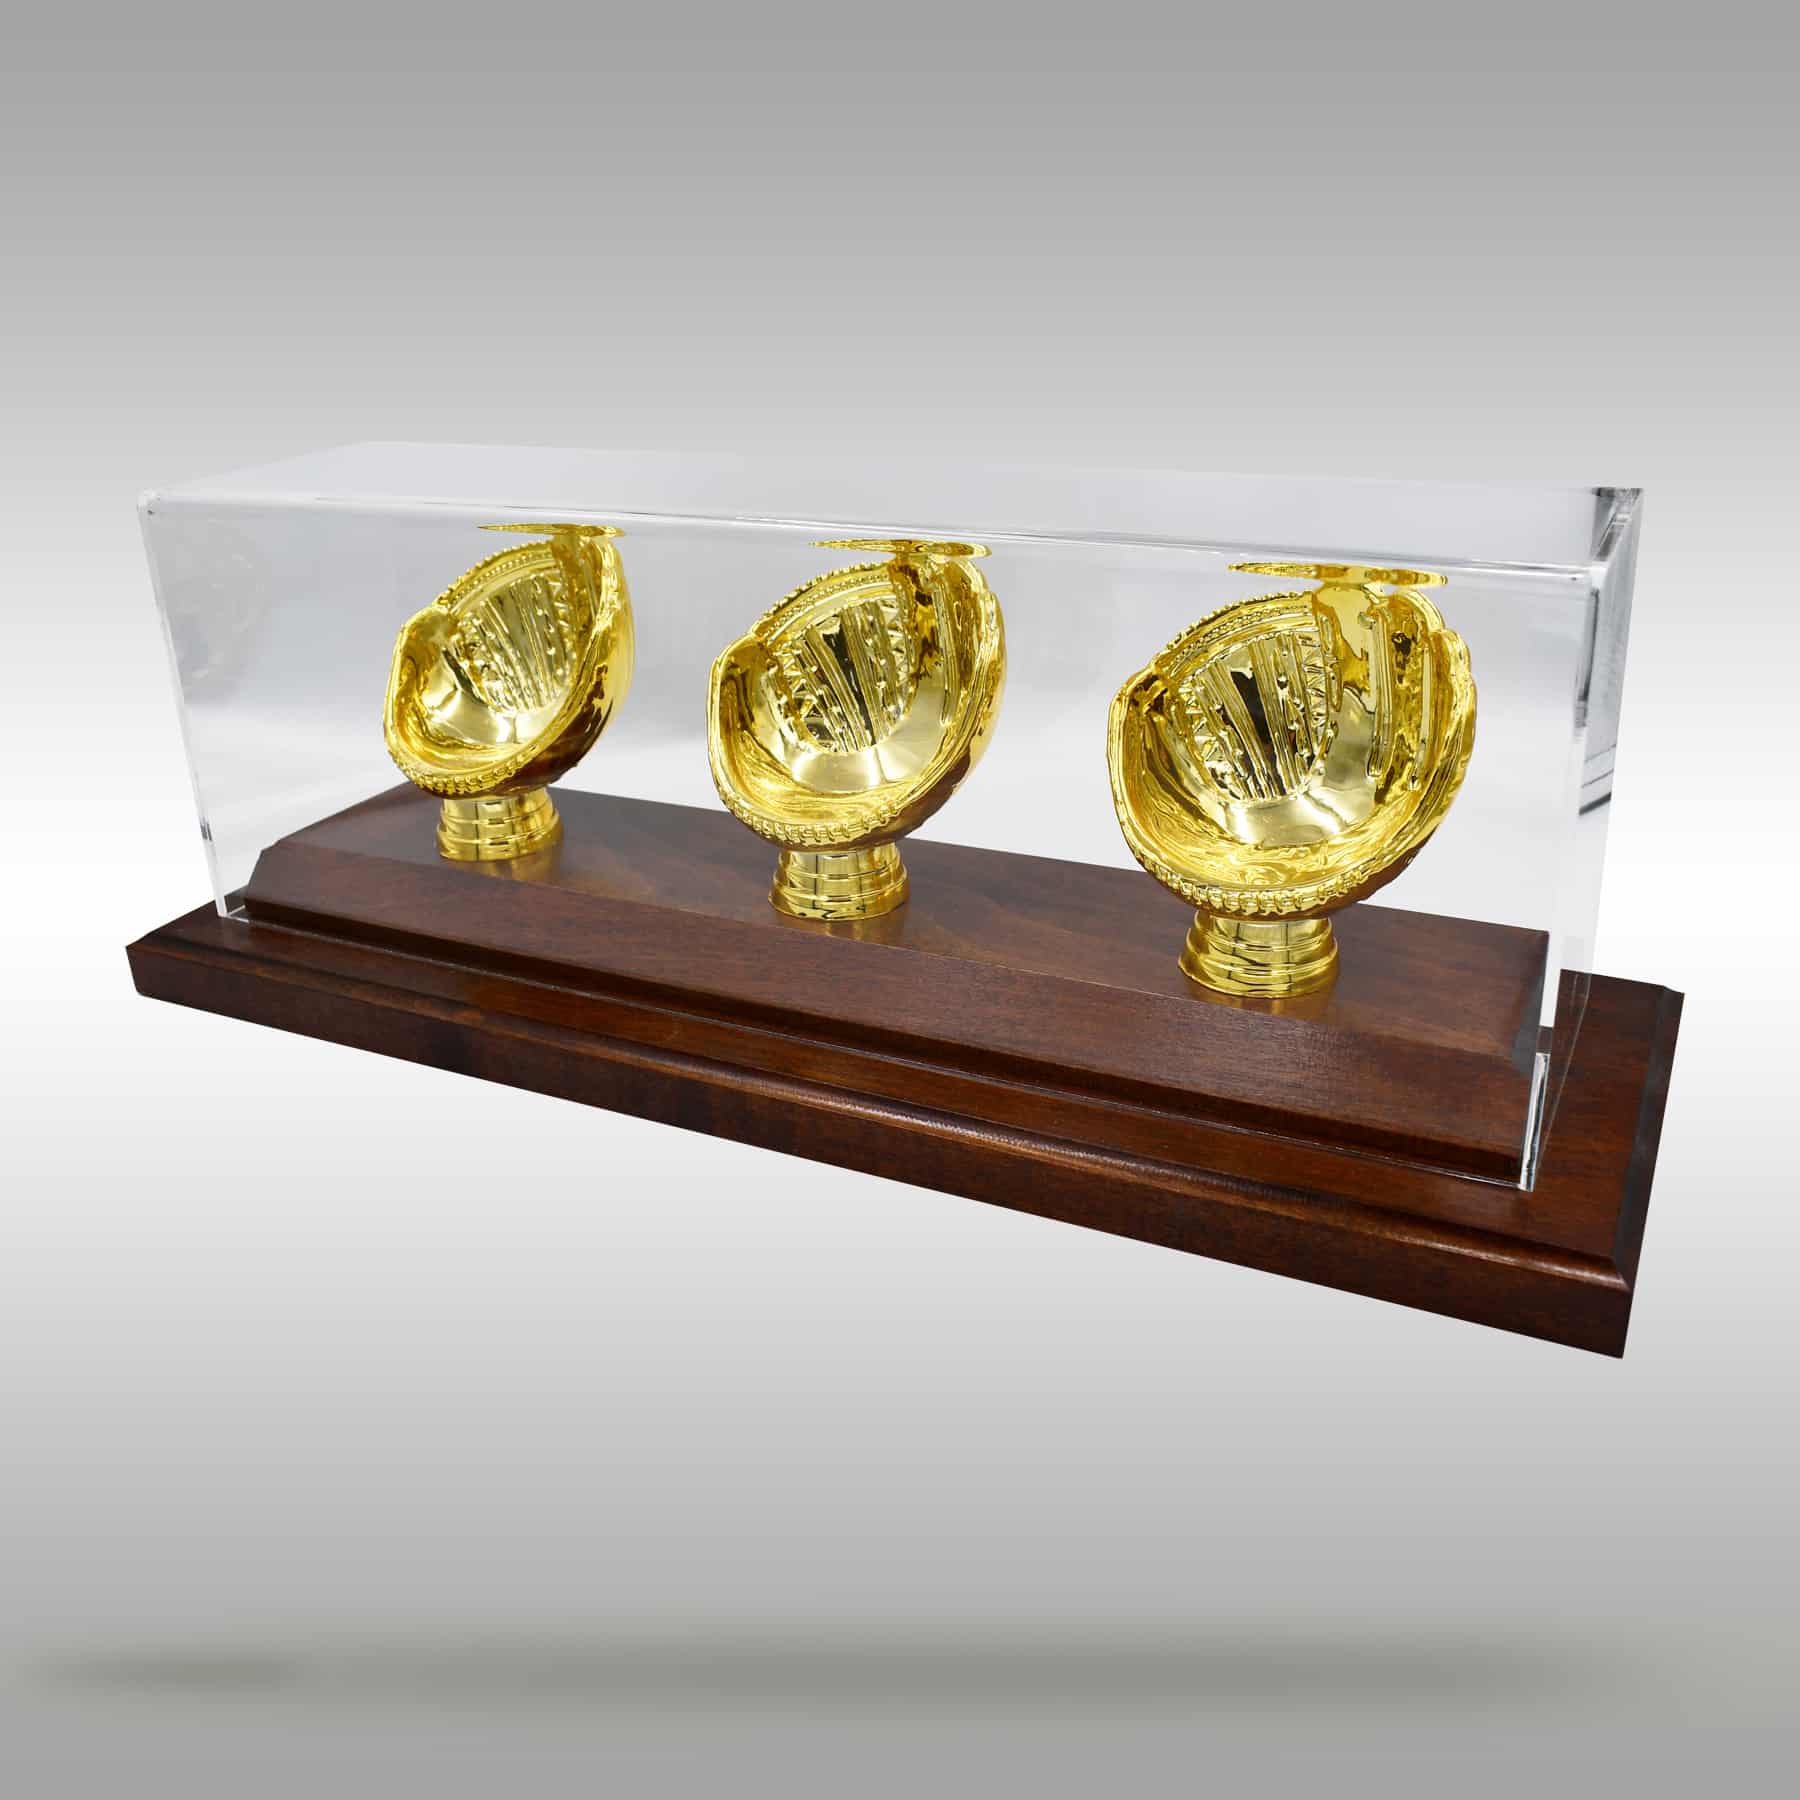 Gold Glove Baseball Display Case - Cooperstown Bat Company